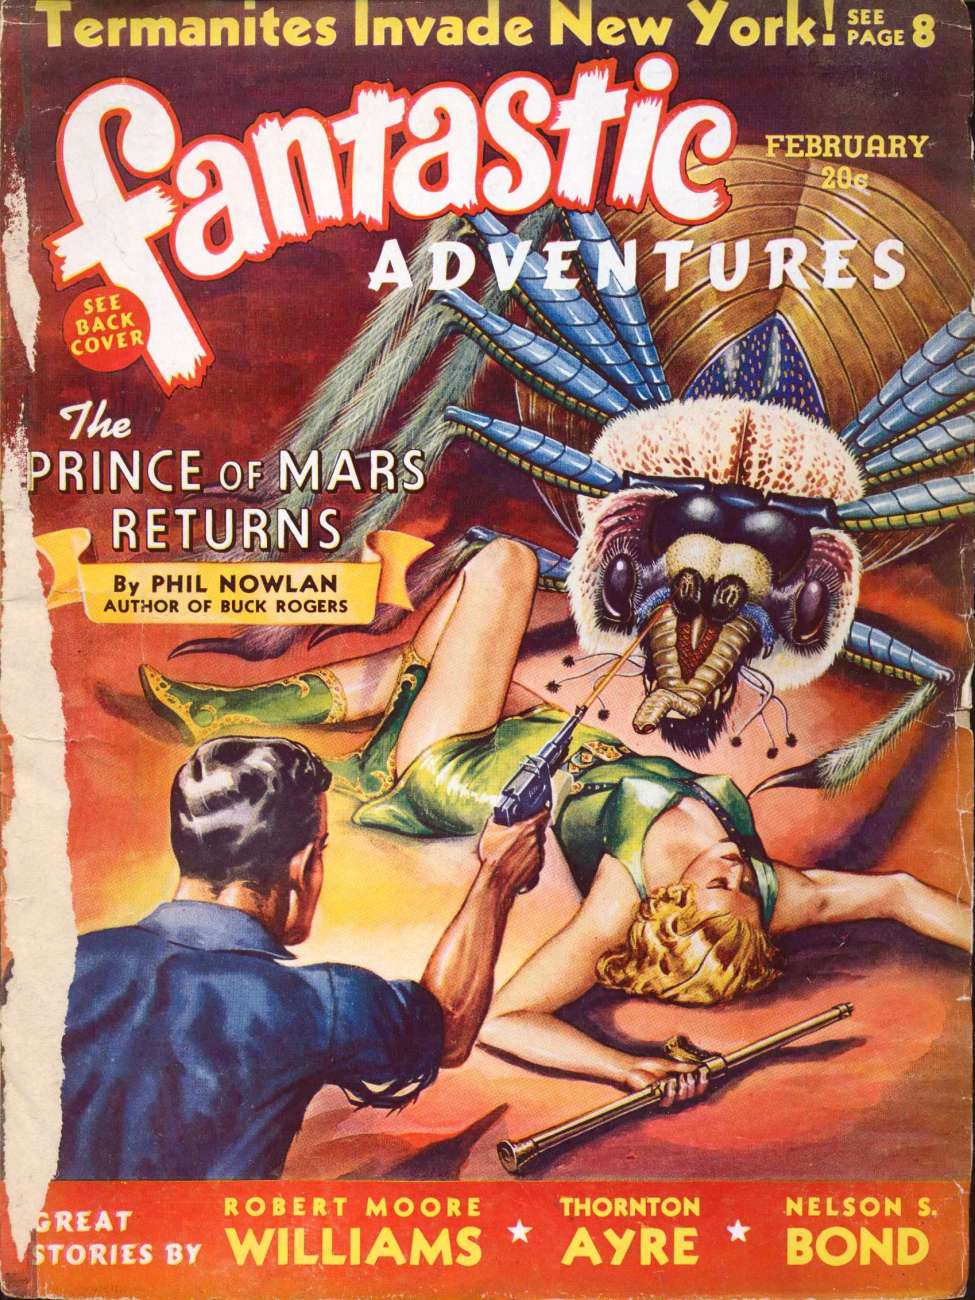 Comic Book Cover For Fantastic Adventures v2 2 -The Prince of Mars Returns - Phil Nowlan p1